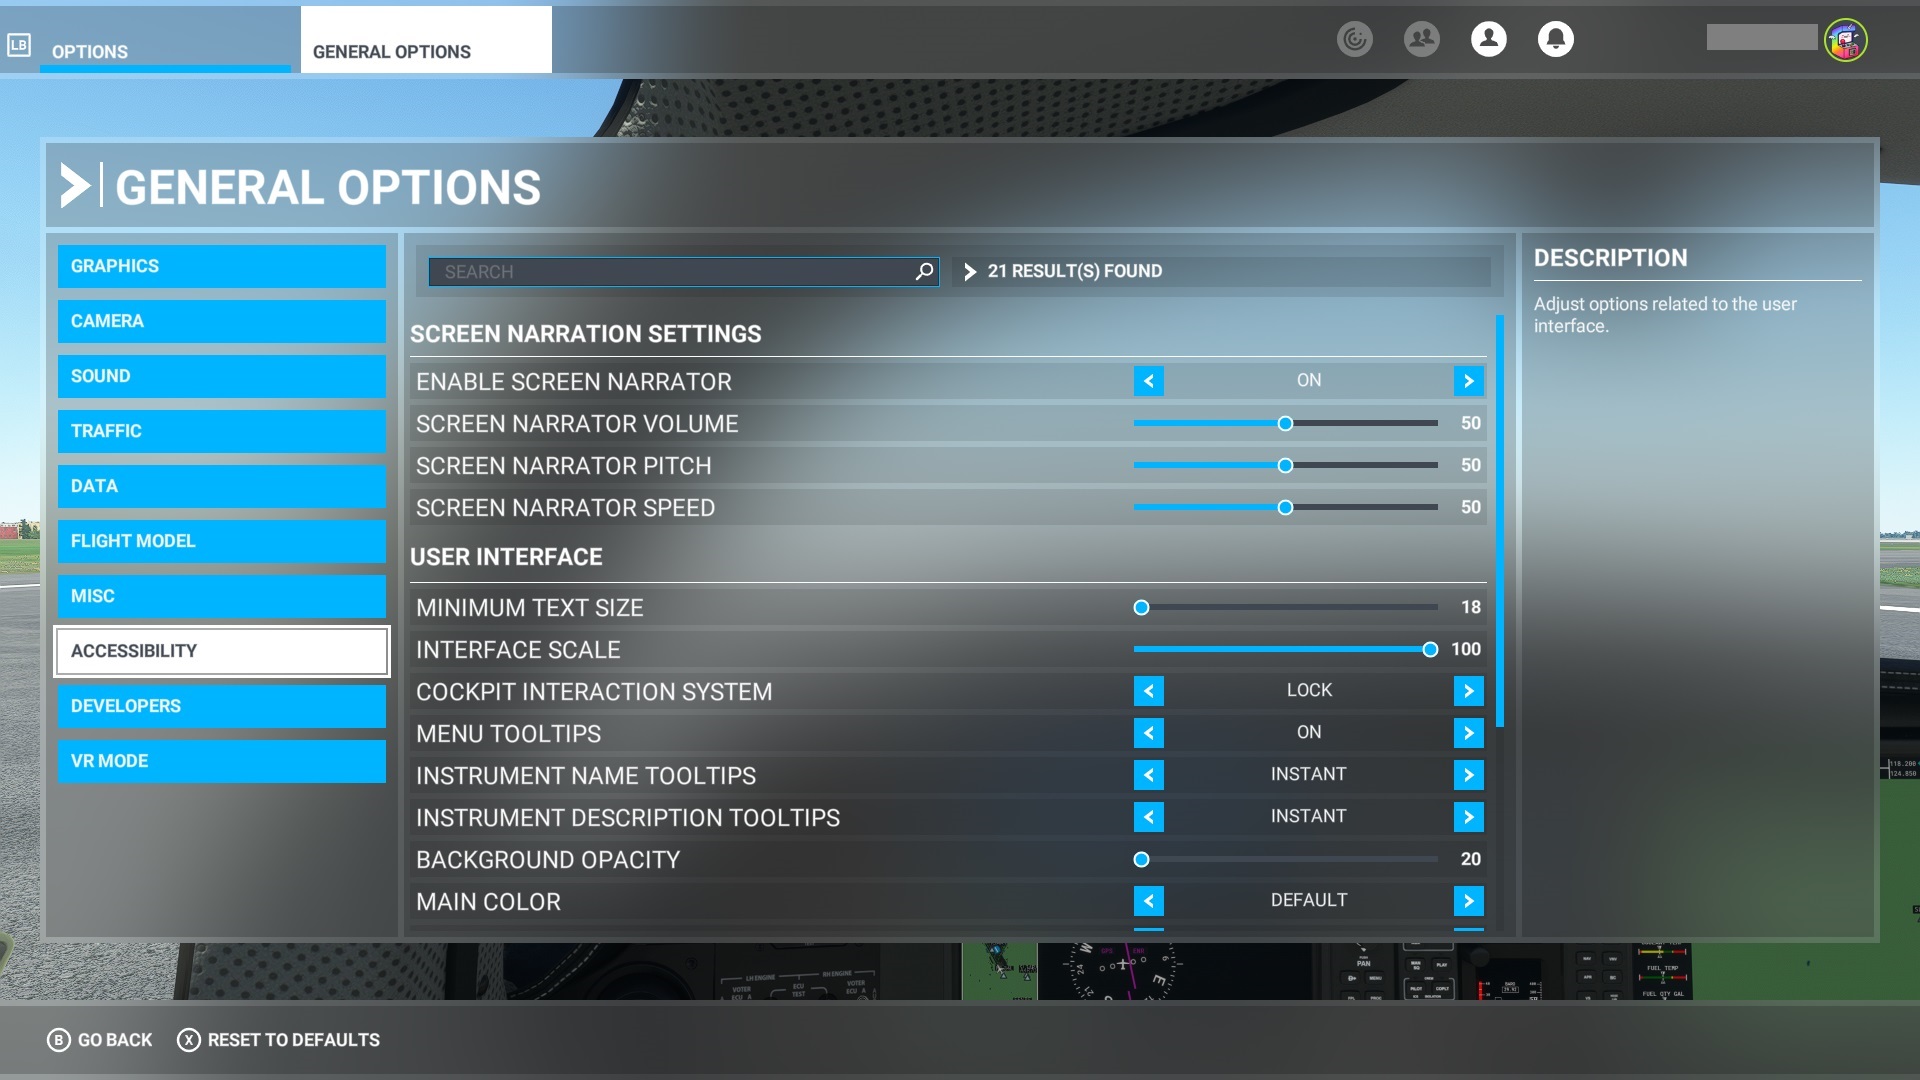 Screenshot of Flight Simulator geneal options menu with option to enable Narrator and sliders to customize its volume, pitch, and speed.